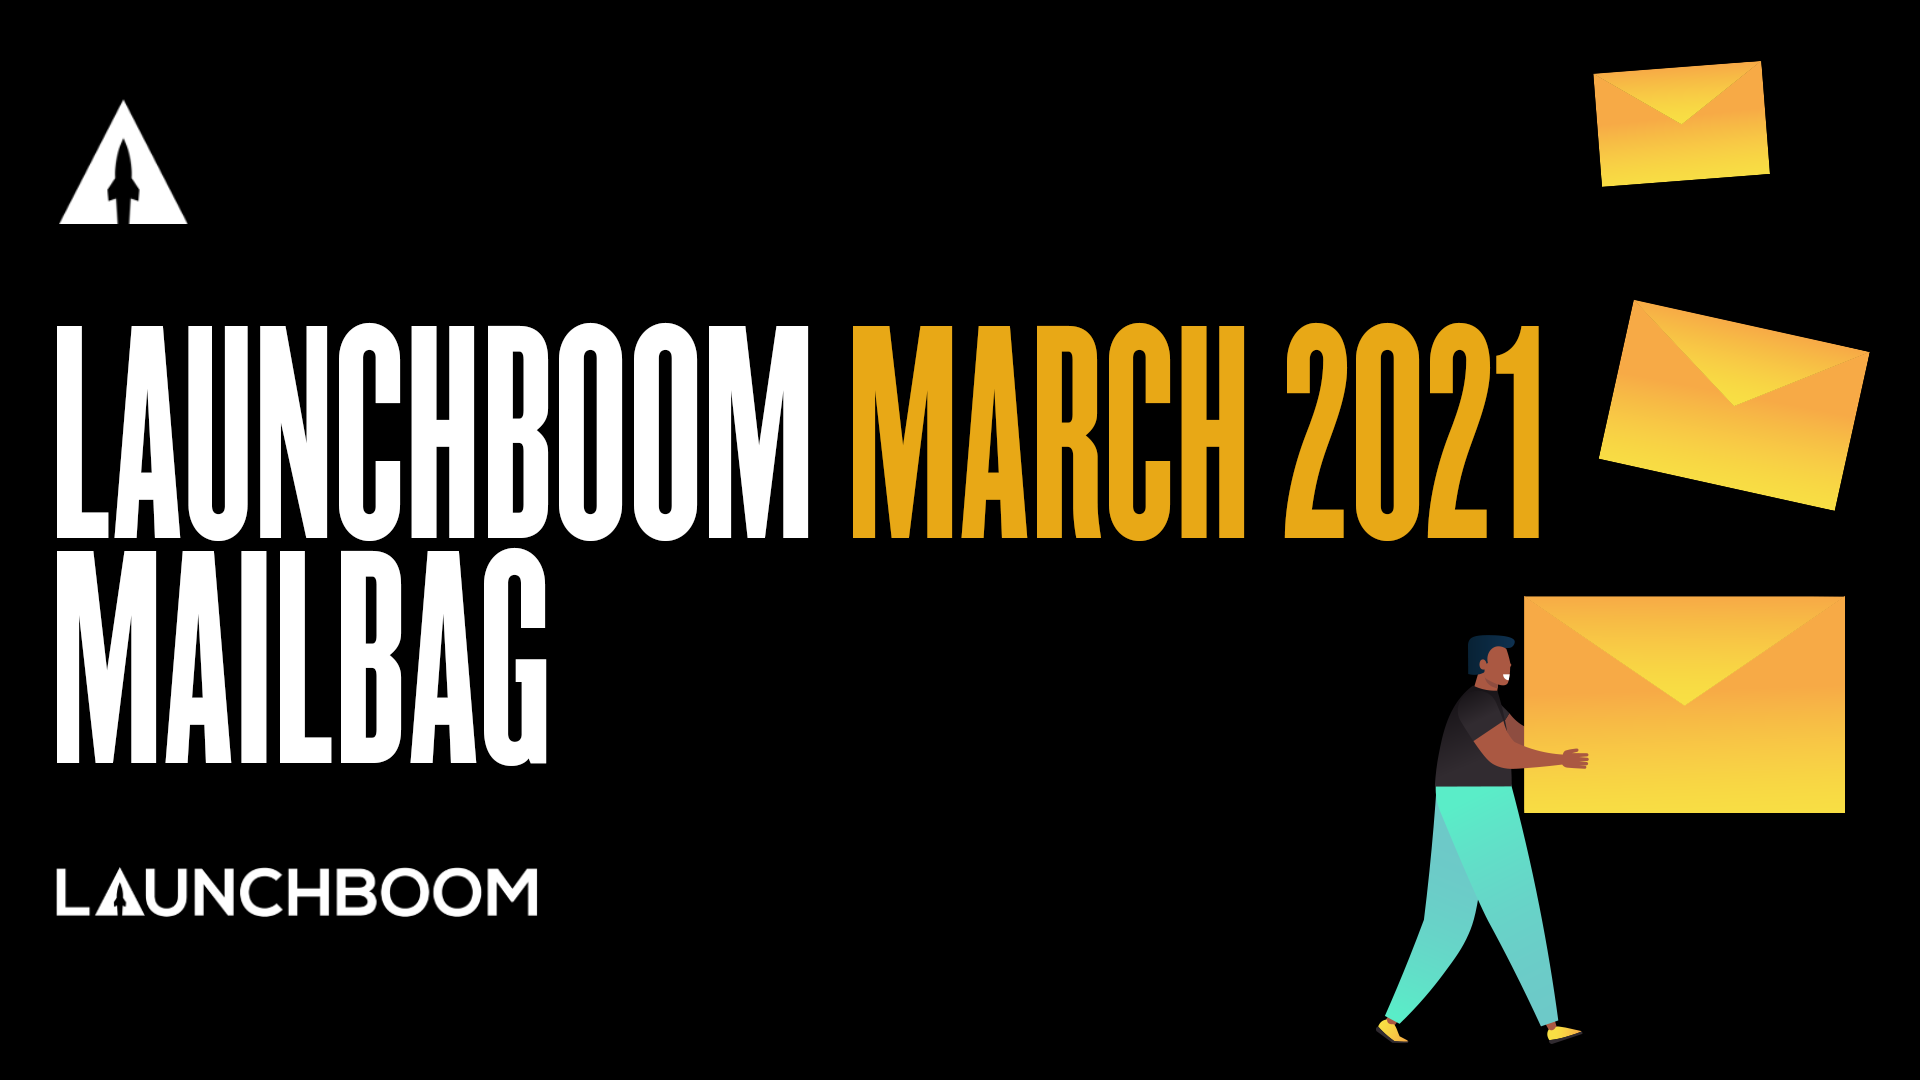 LaunchBoom March 2021 Mailbag